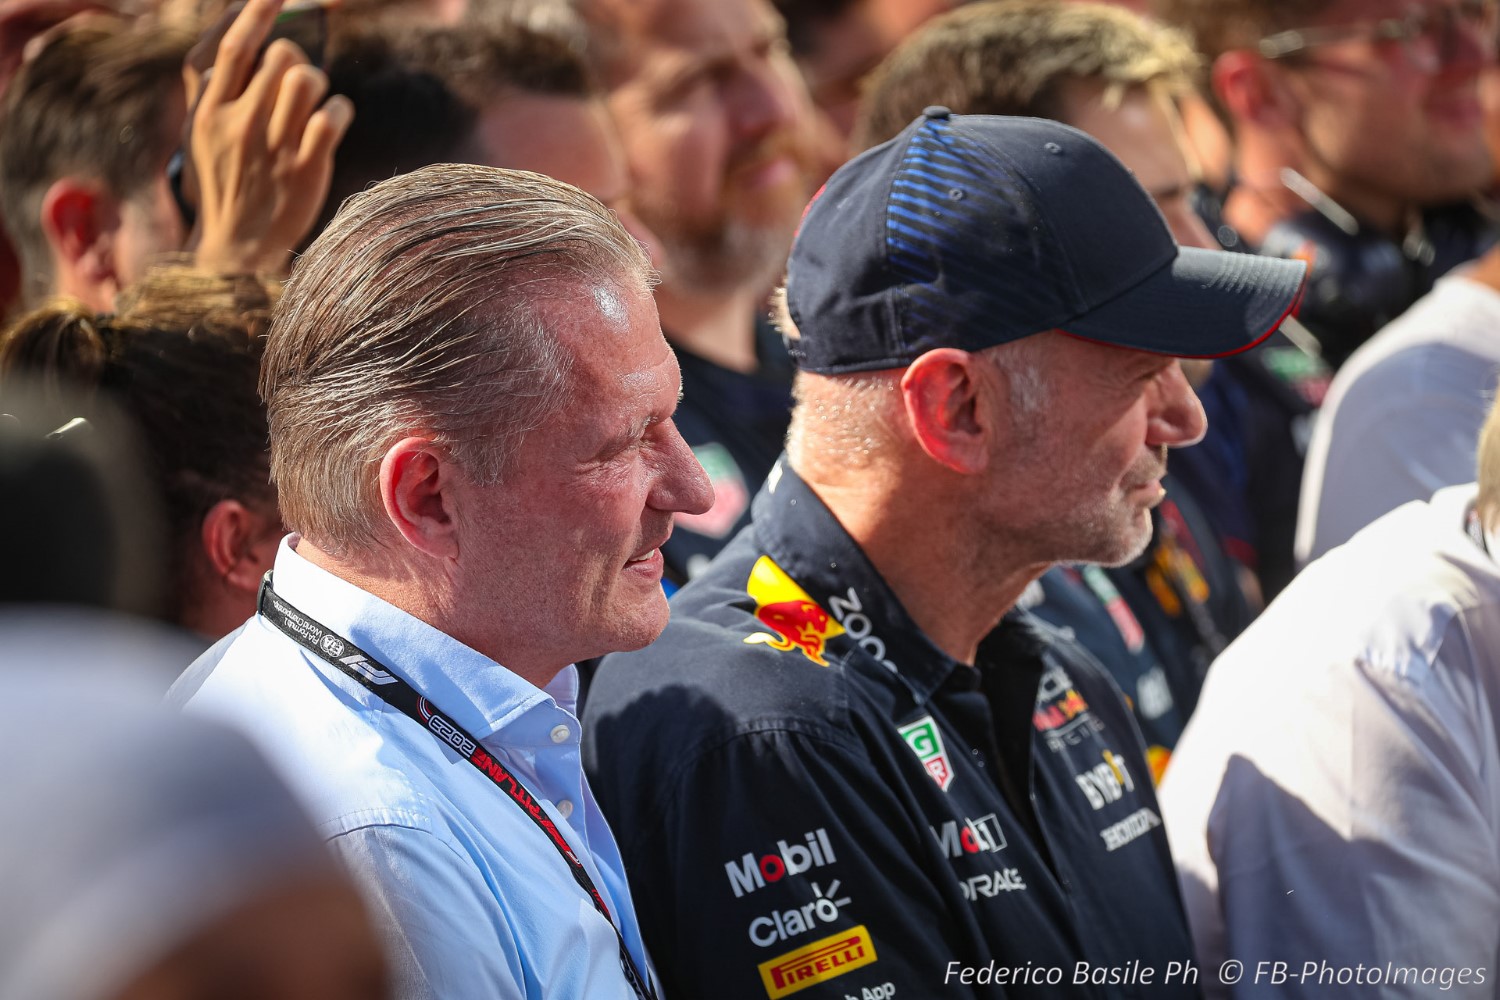 Jos Verstappen (NED) father of Max Verstappen Red Bull Racing Honda, and former F1 driver, for Arrows; Tyrrel; Benetton; Footwork; and Minardi during the Hungarian GP, Budapest 20-23 July 2023 at the Hungaroring, Formula 1 World championship 2023.